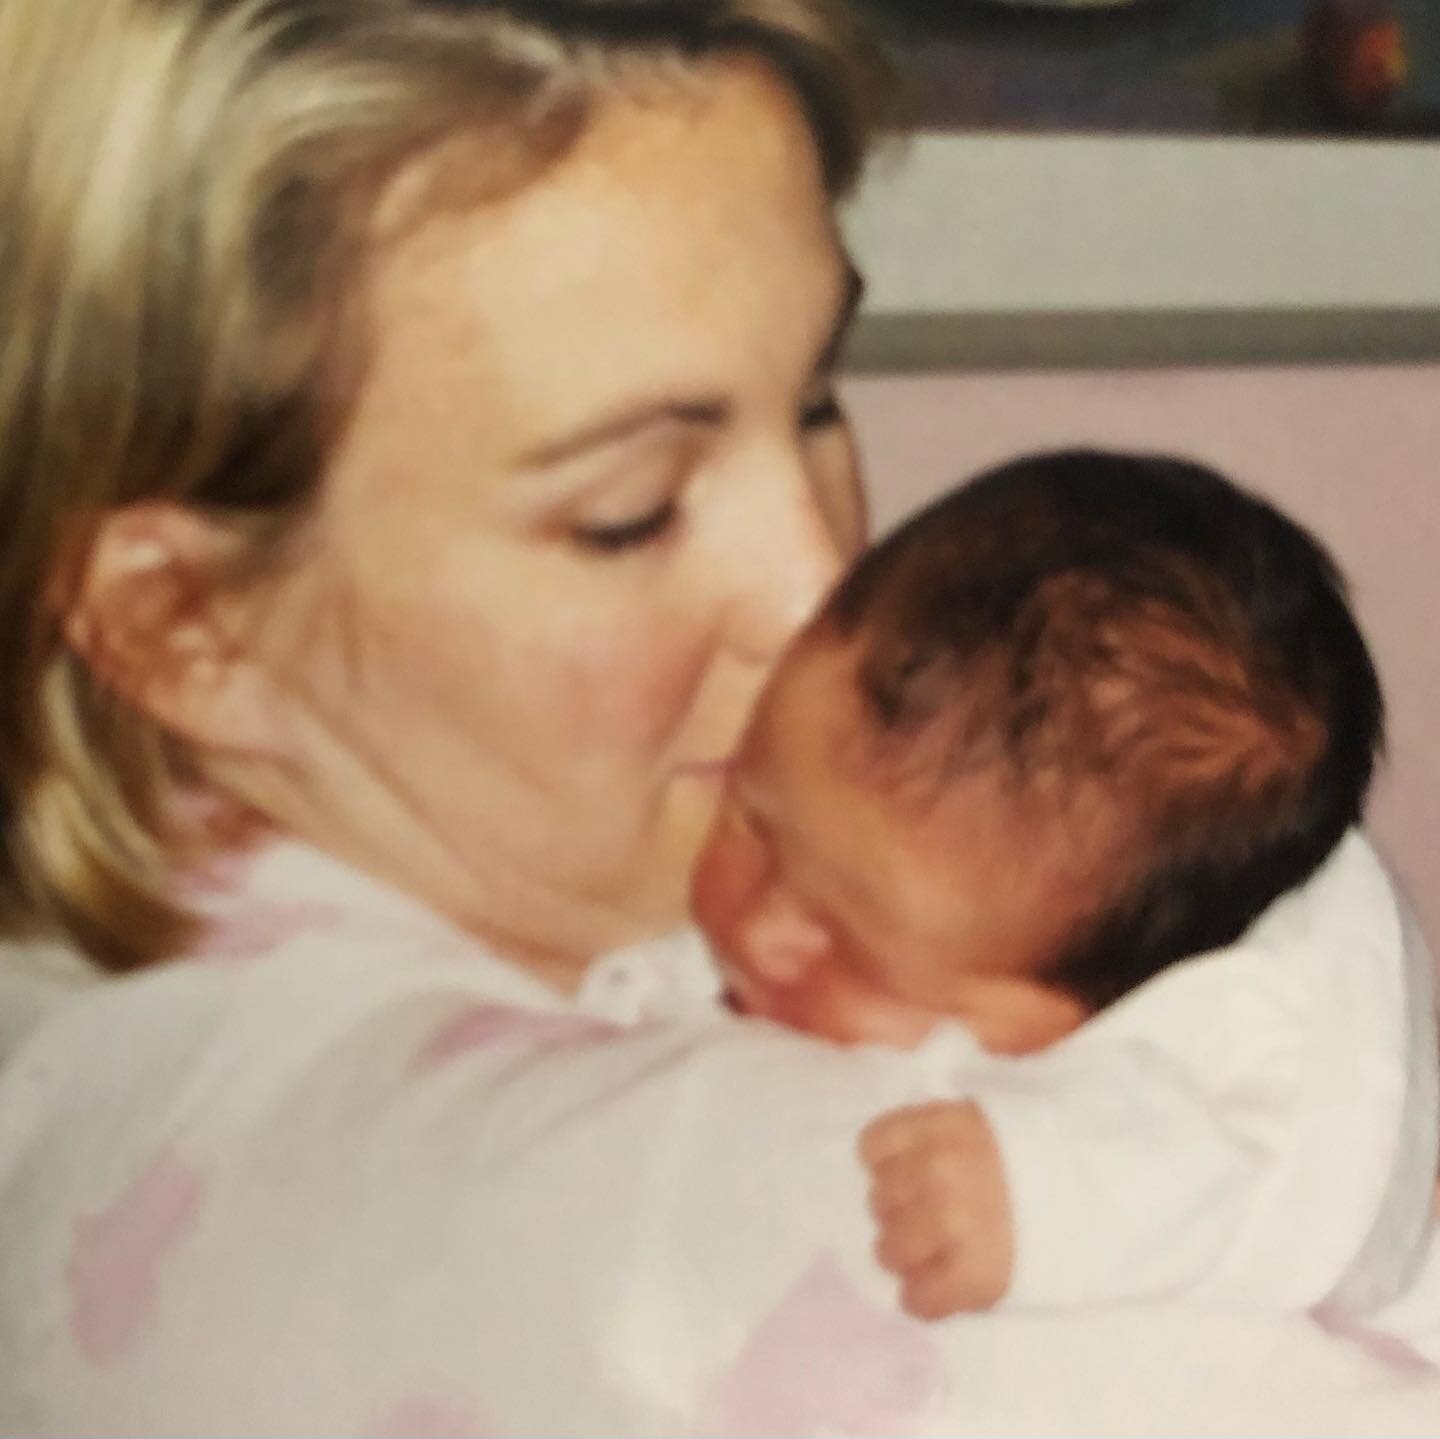 21 years ago today you made me a mother. I love you to a depth beyond description. You are our everything. Missing you today feels extra heart-crushing but I smile when I imagine celebrating your 21st with you and I feel you with us. Happy Birthday, 